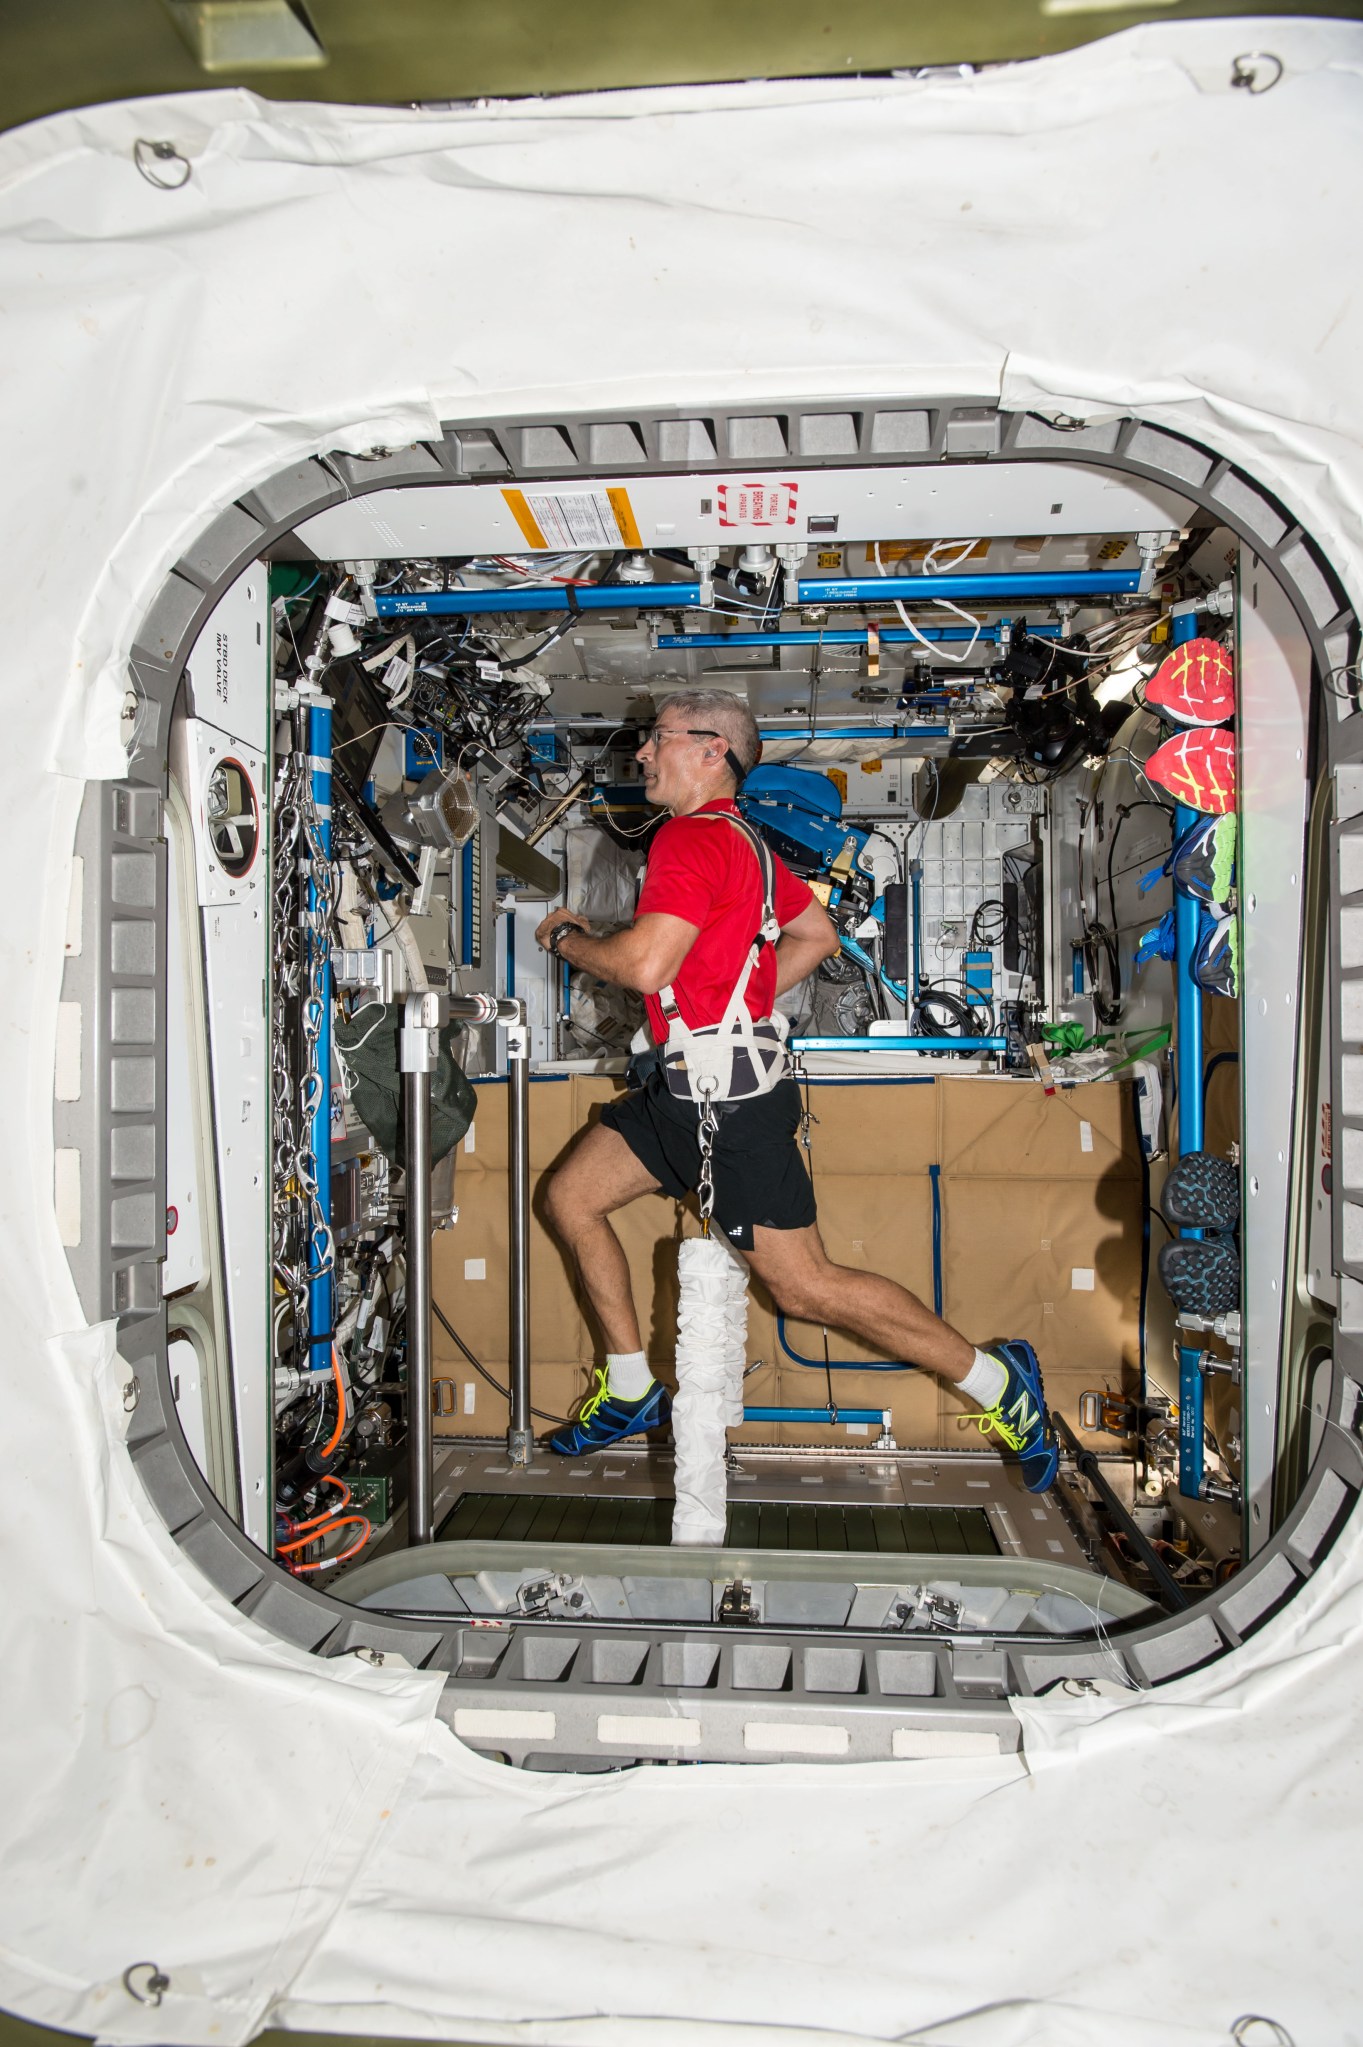 Astronaut Mark T. Vande Hei, Expedition 53 Flight Engineer (FE), exercises on the Combined Operational Load Bearing External Resistance Treadmill (COLBERT) T2 in the Node 3.